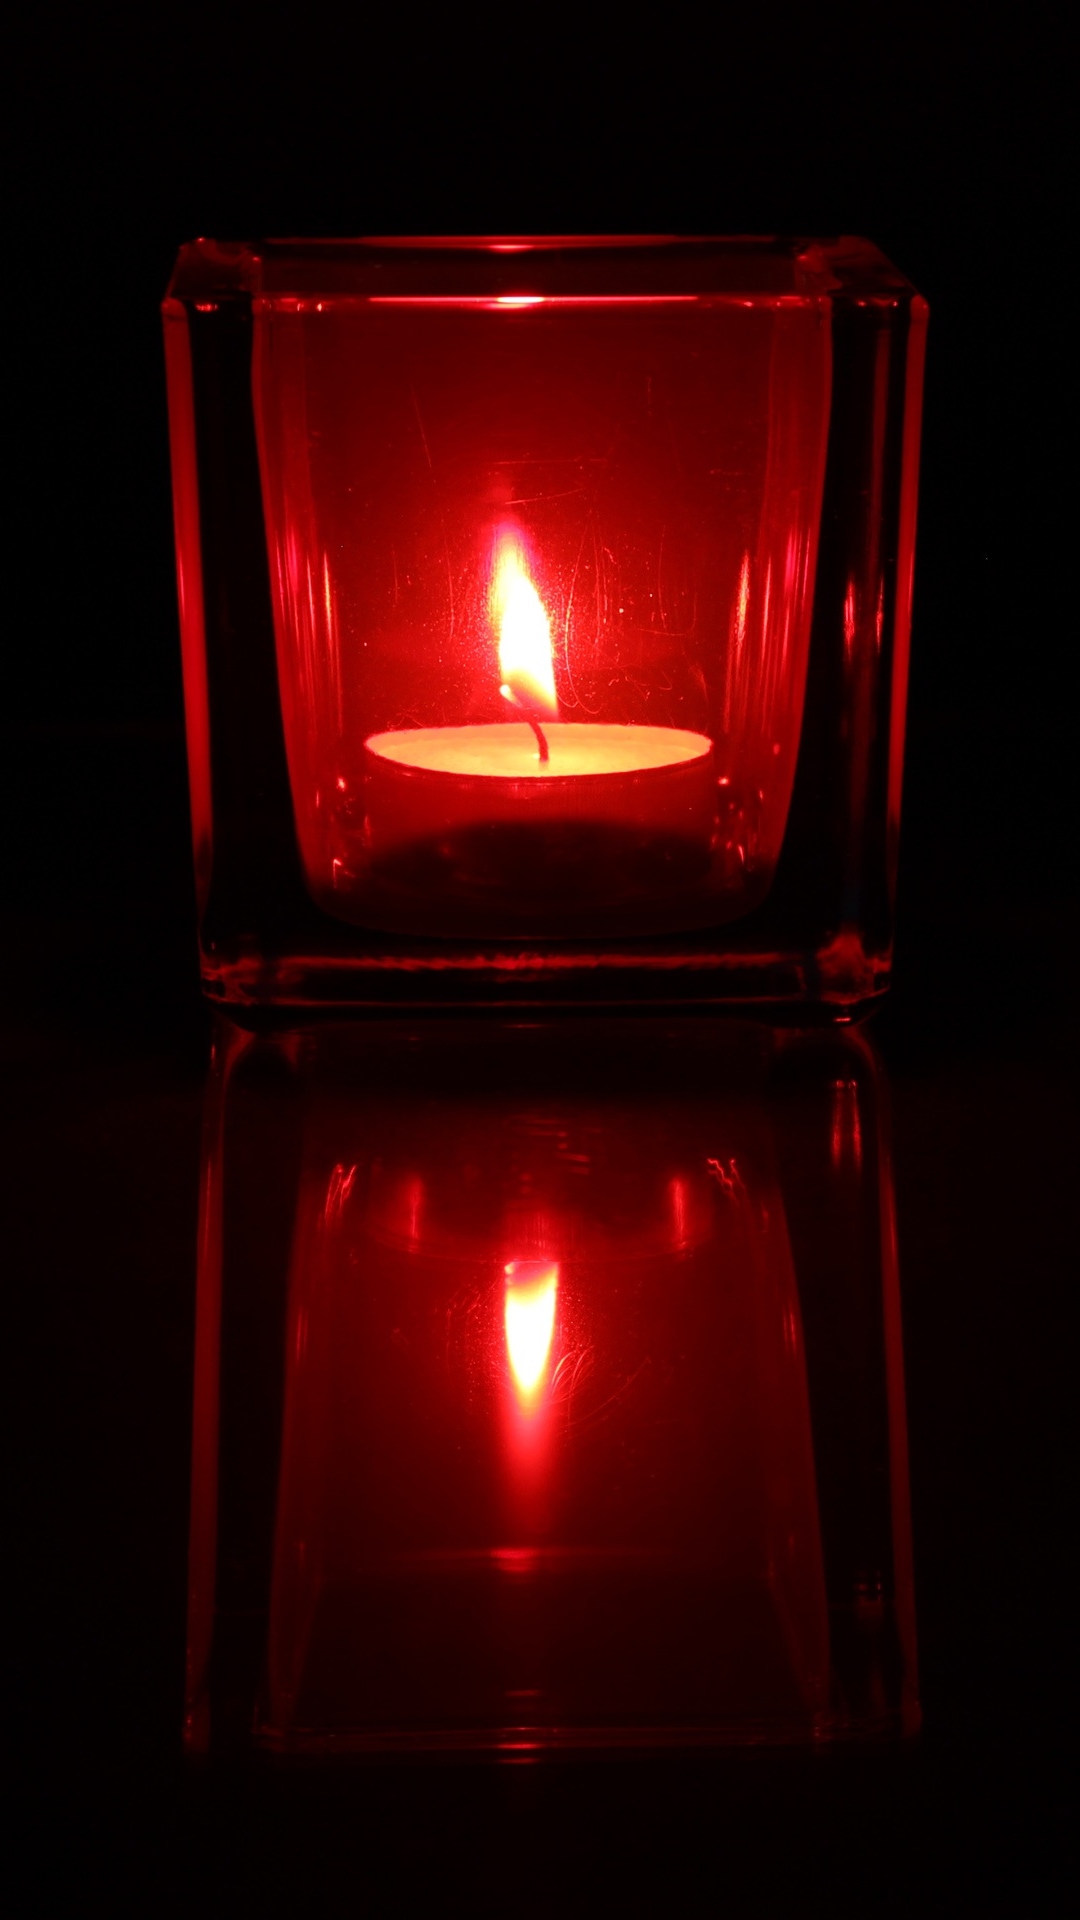 A tealight candle in a red glass